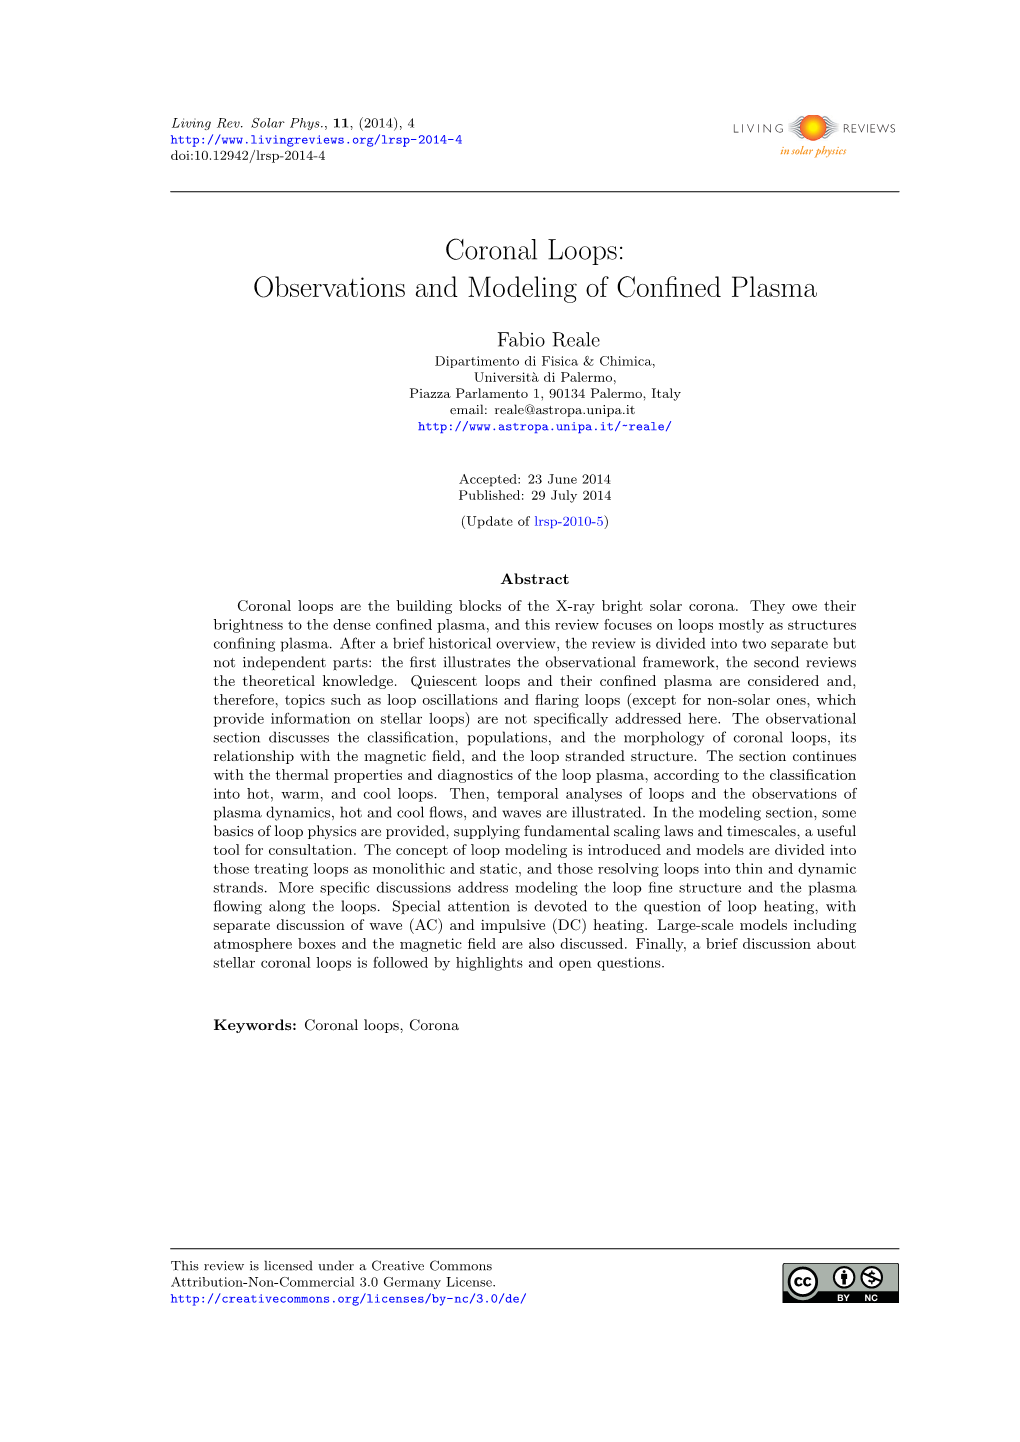 Coronal Loops: Observations and Modeling of Confined Plasma